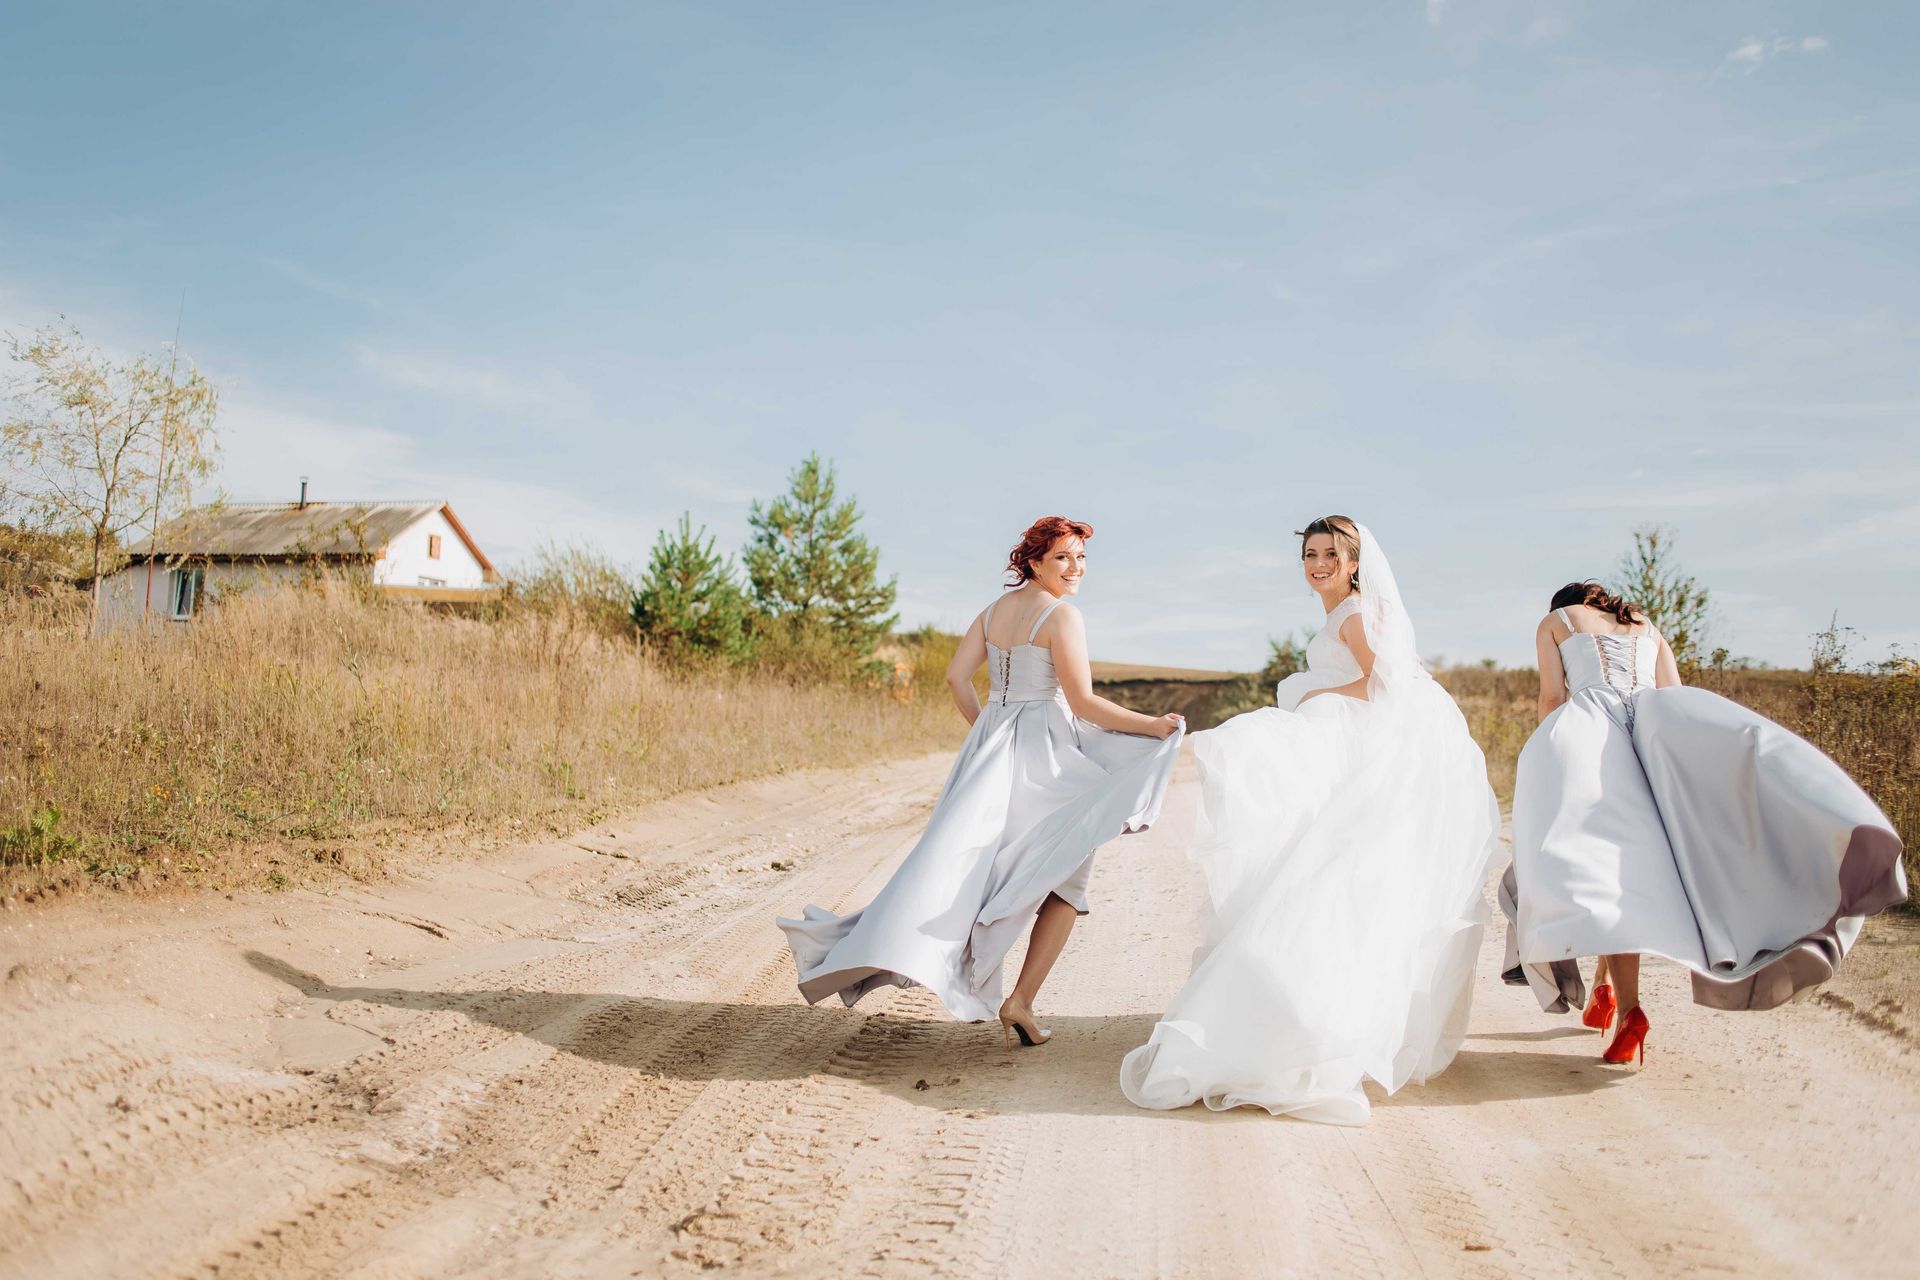 Bride and bridesmaids running down dirt road for photoshoot